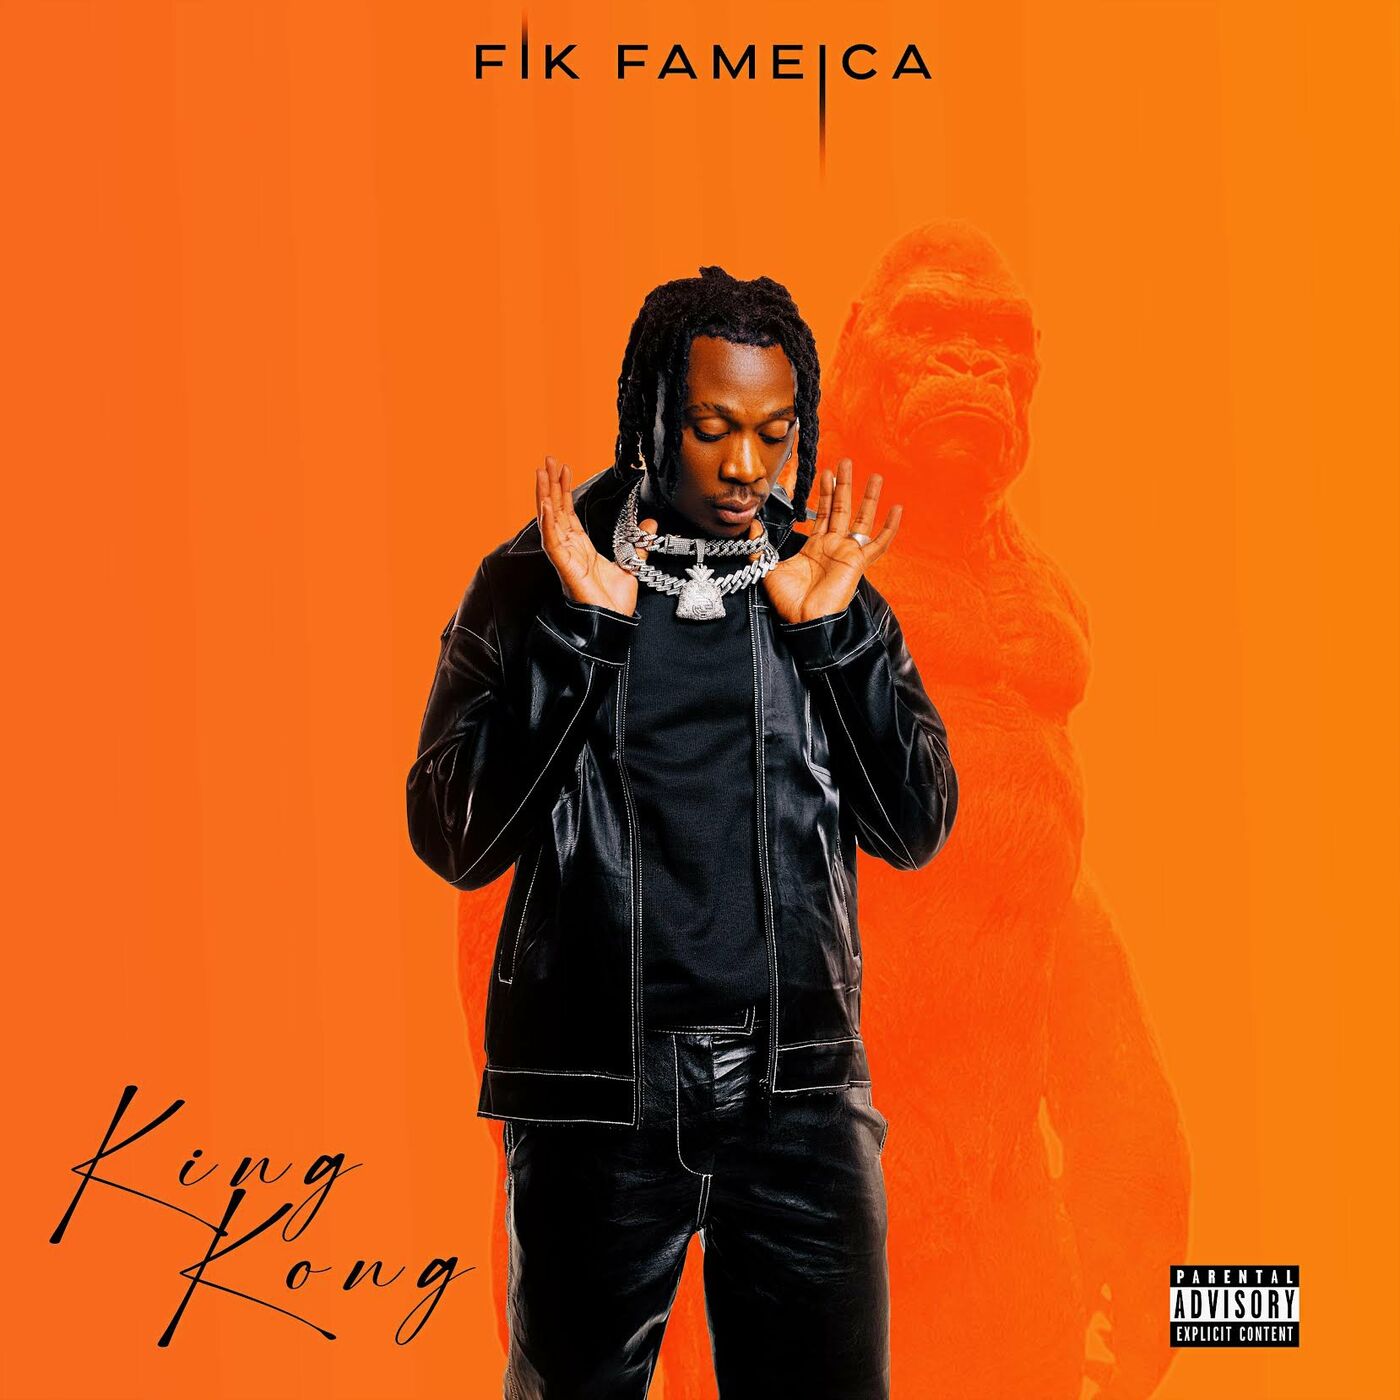 fik-fameica-malembe-album-cover